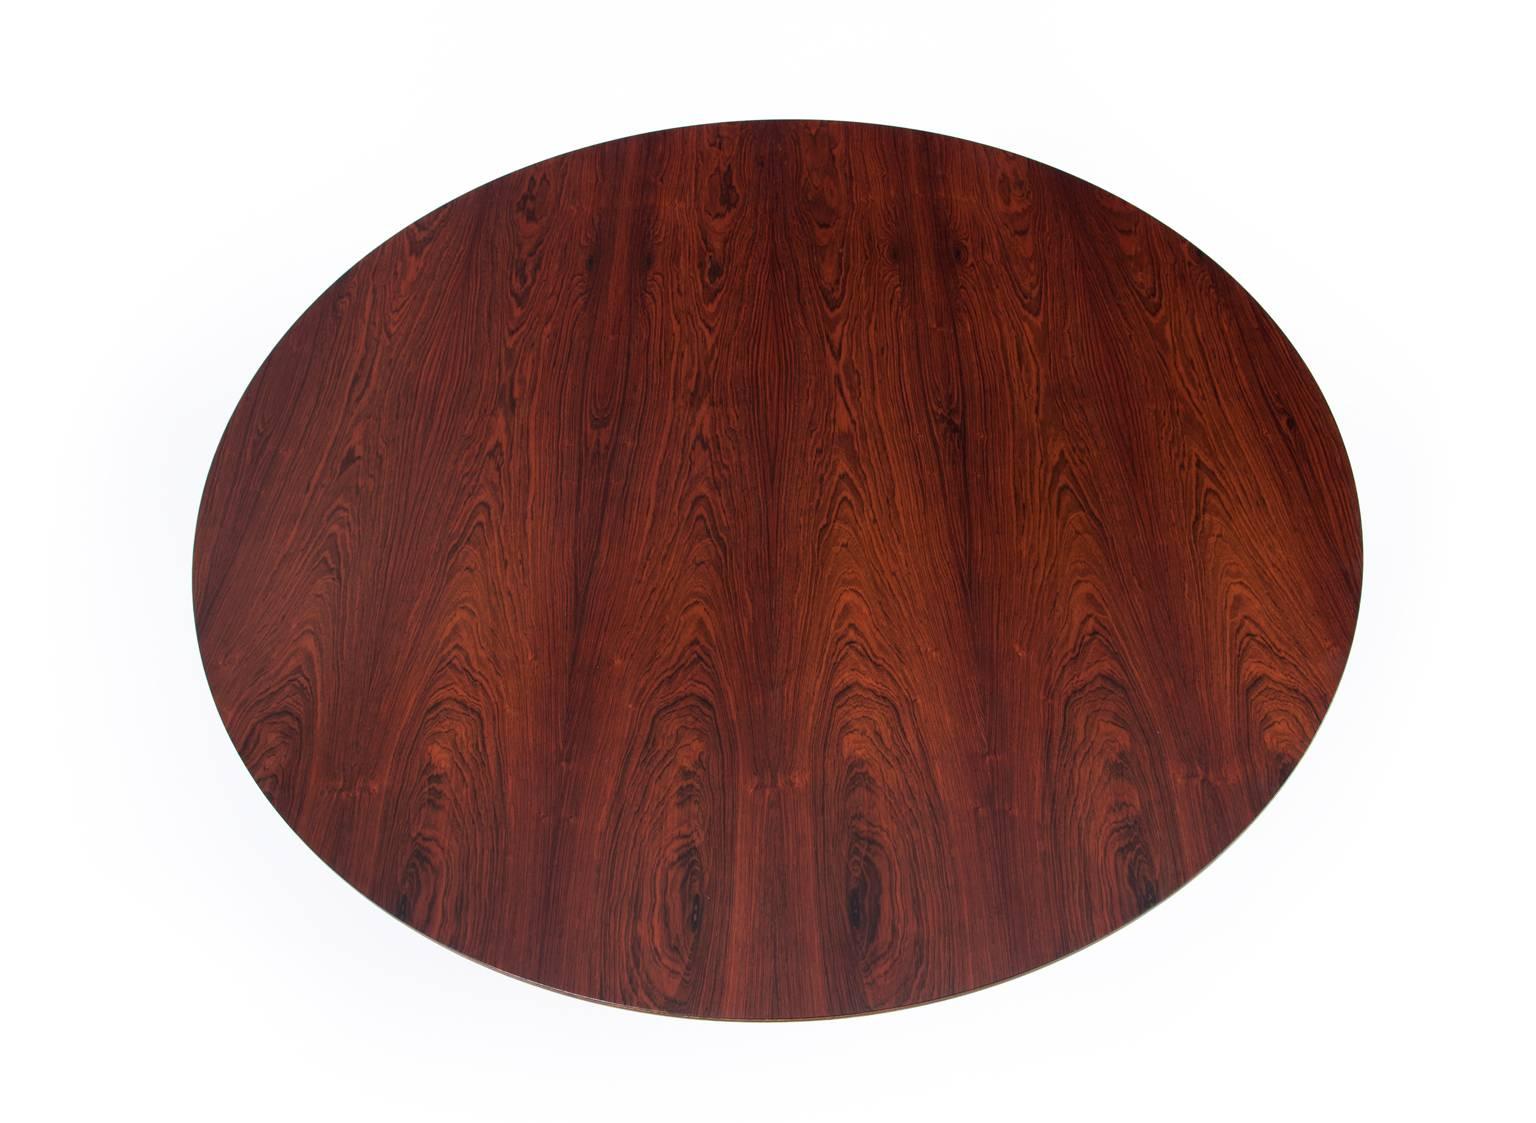 Danish Arne Jacobsen Round Coffee Table in Rosewood For Sale